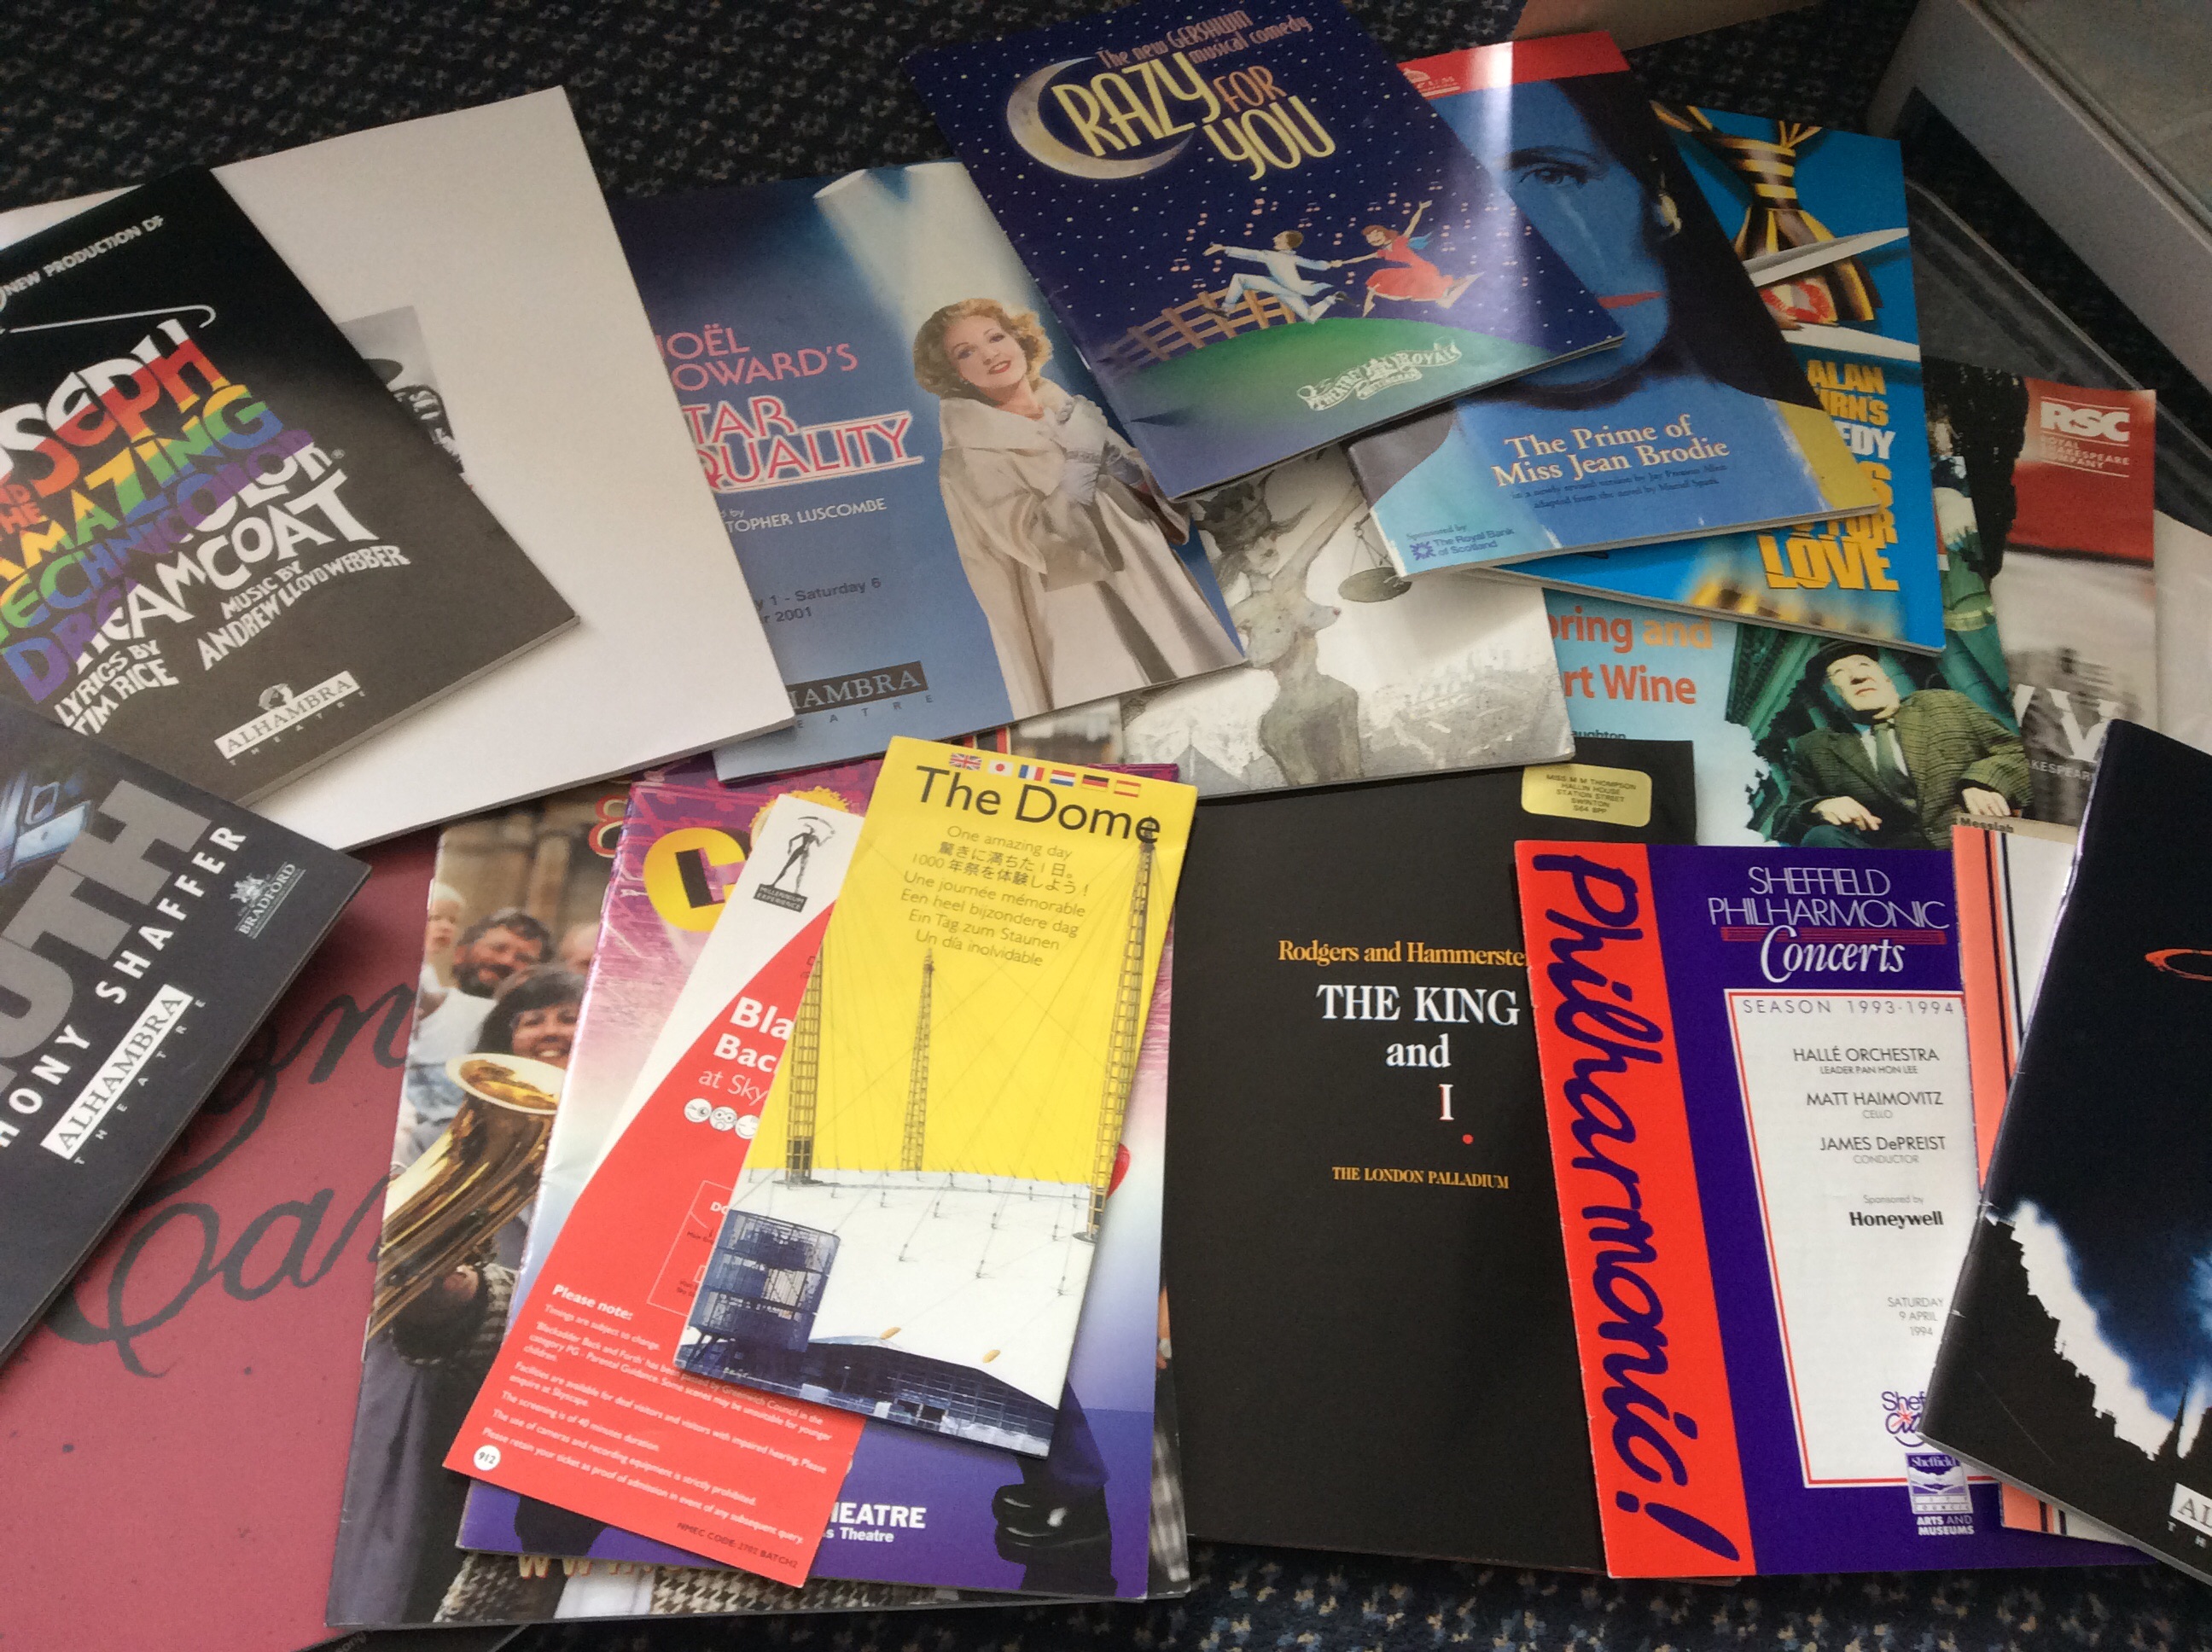 A collection of various theatre programmes including Oliver, Joseph and the amazing technicolor